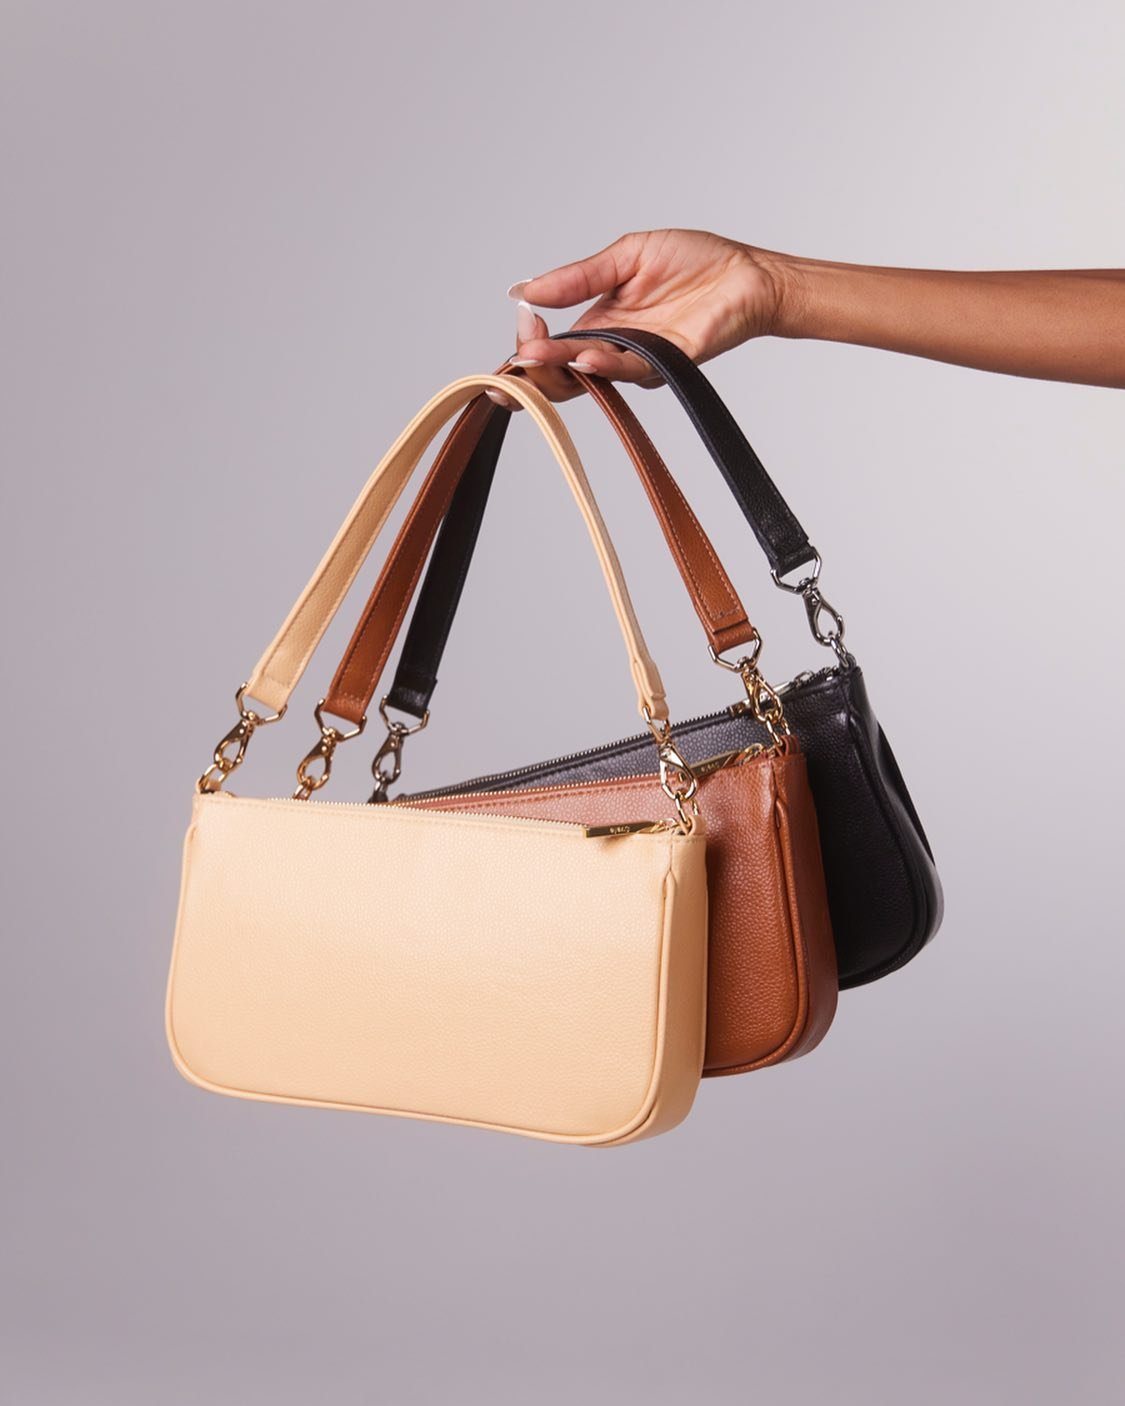 14 Sustainable Vegan Leather Handbag Brands To Carry in 2023